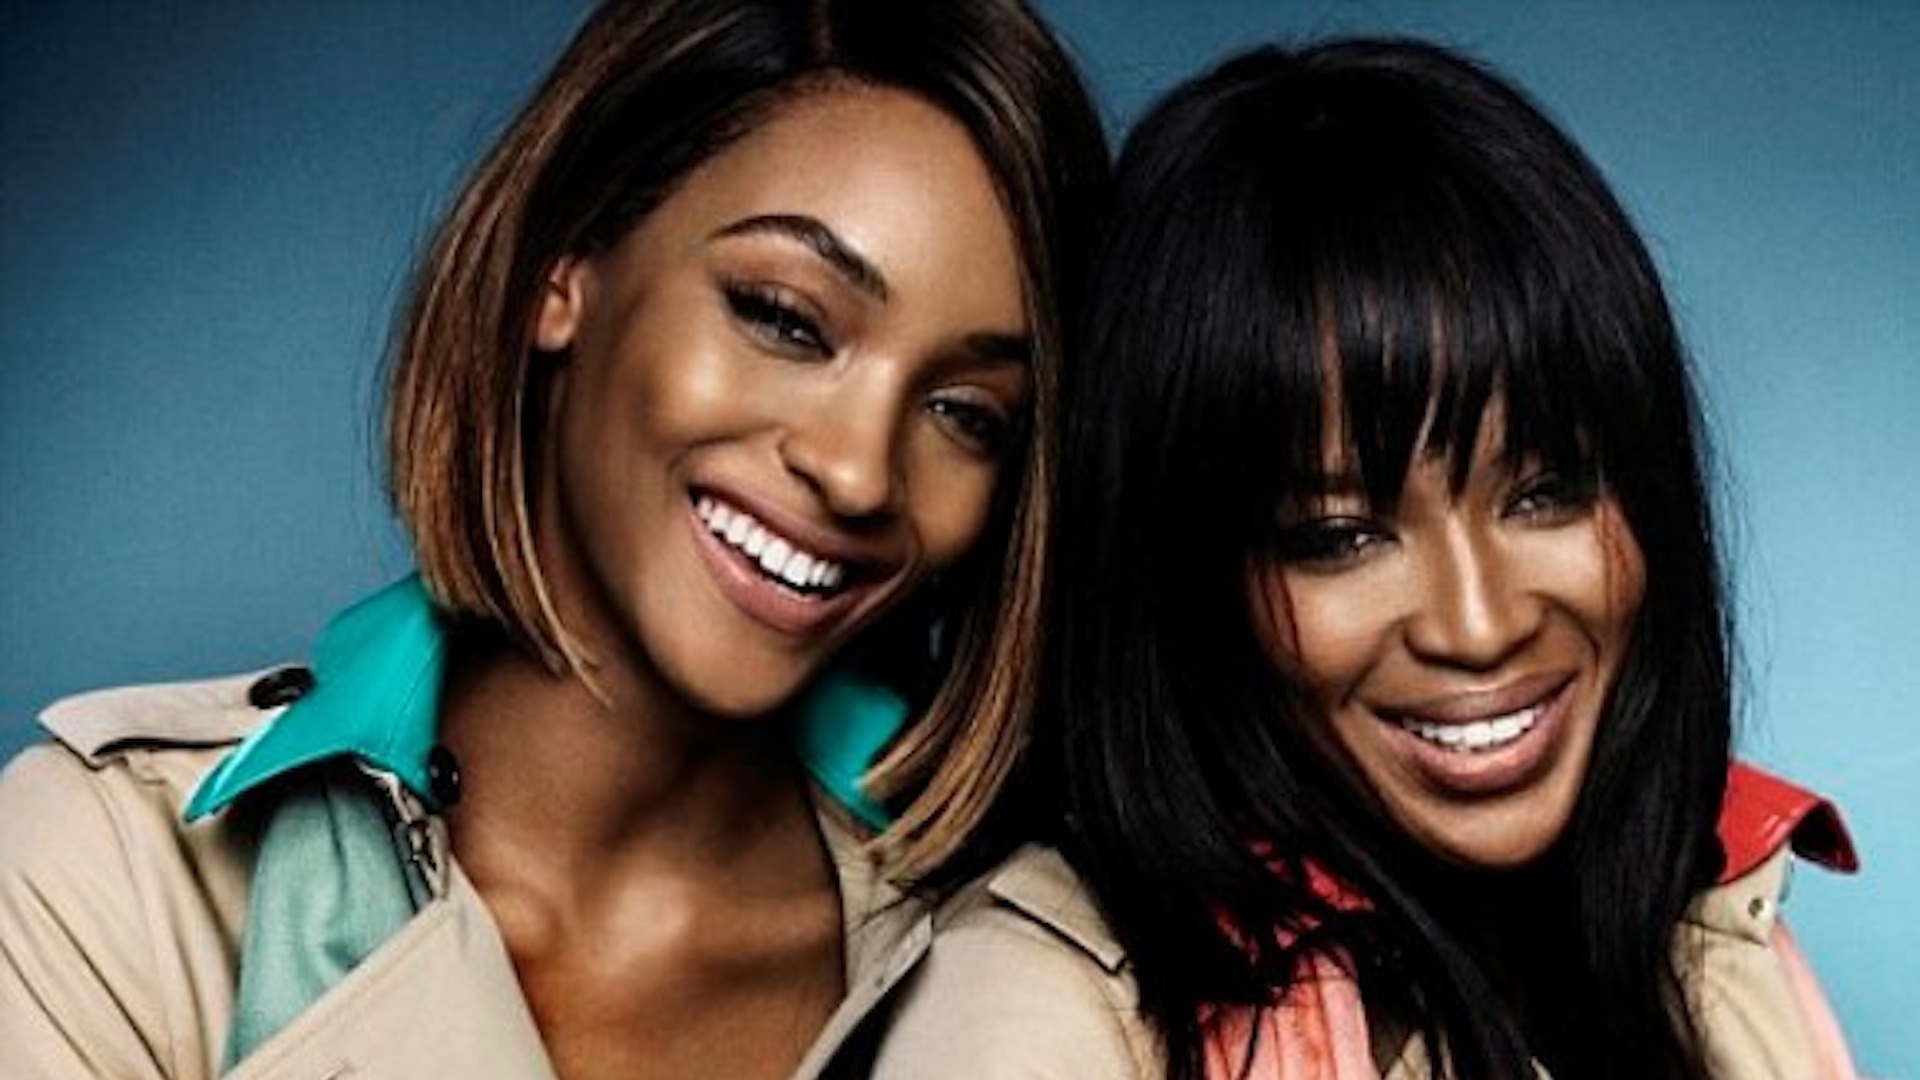 naomi and jourdan for burberry image